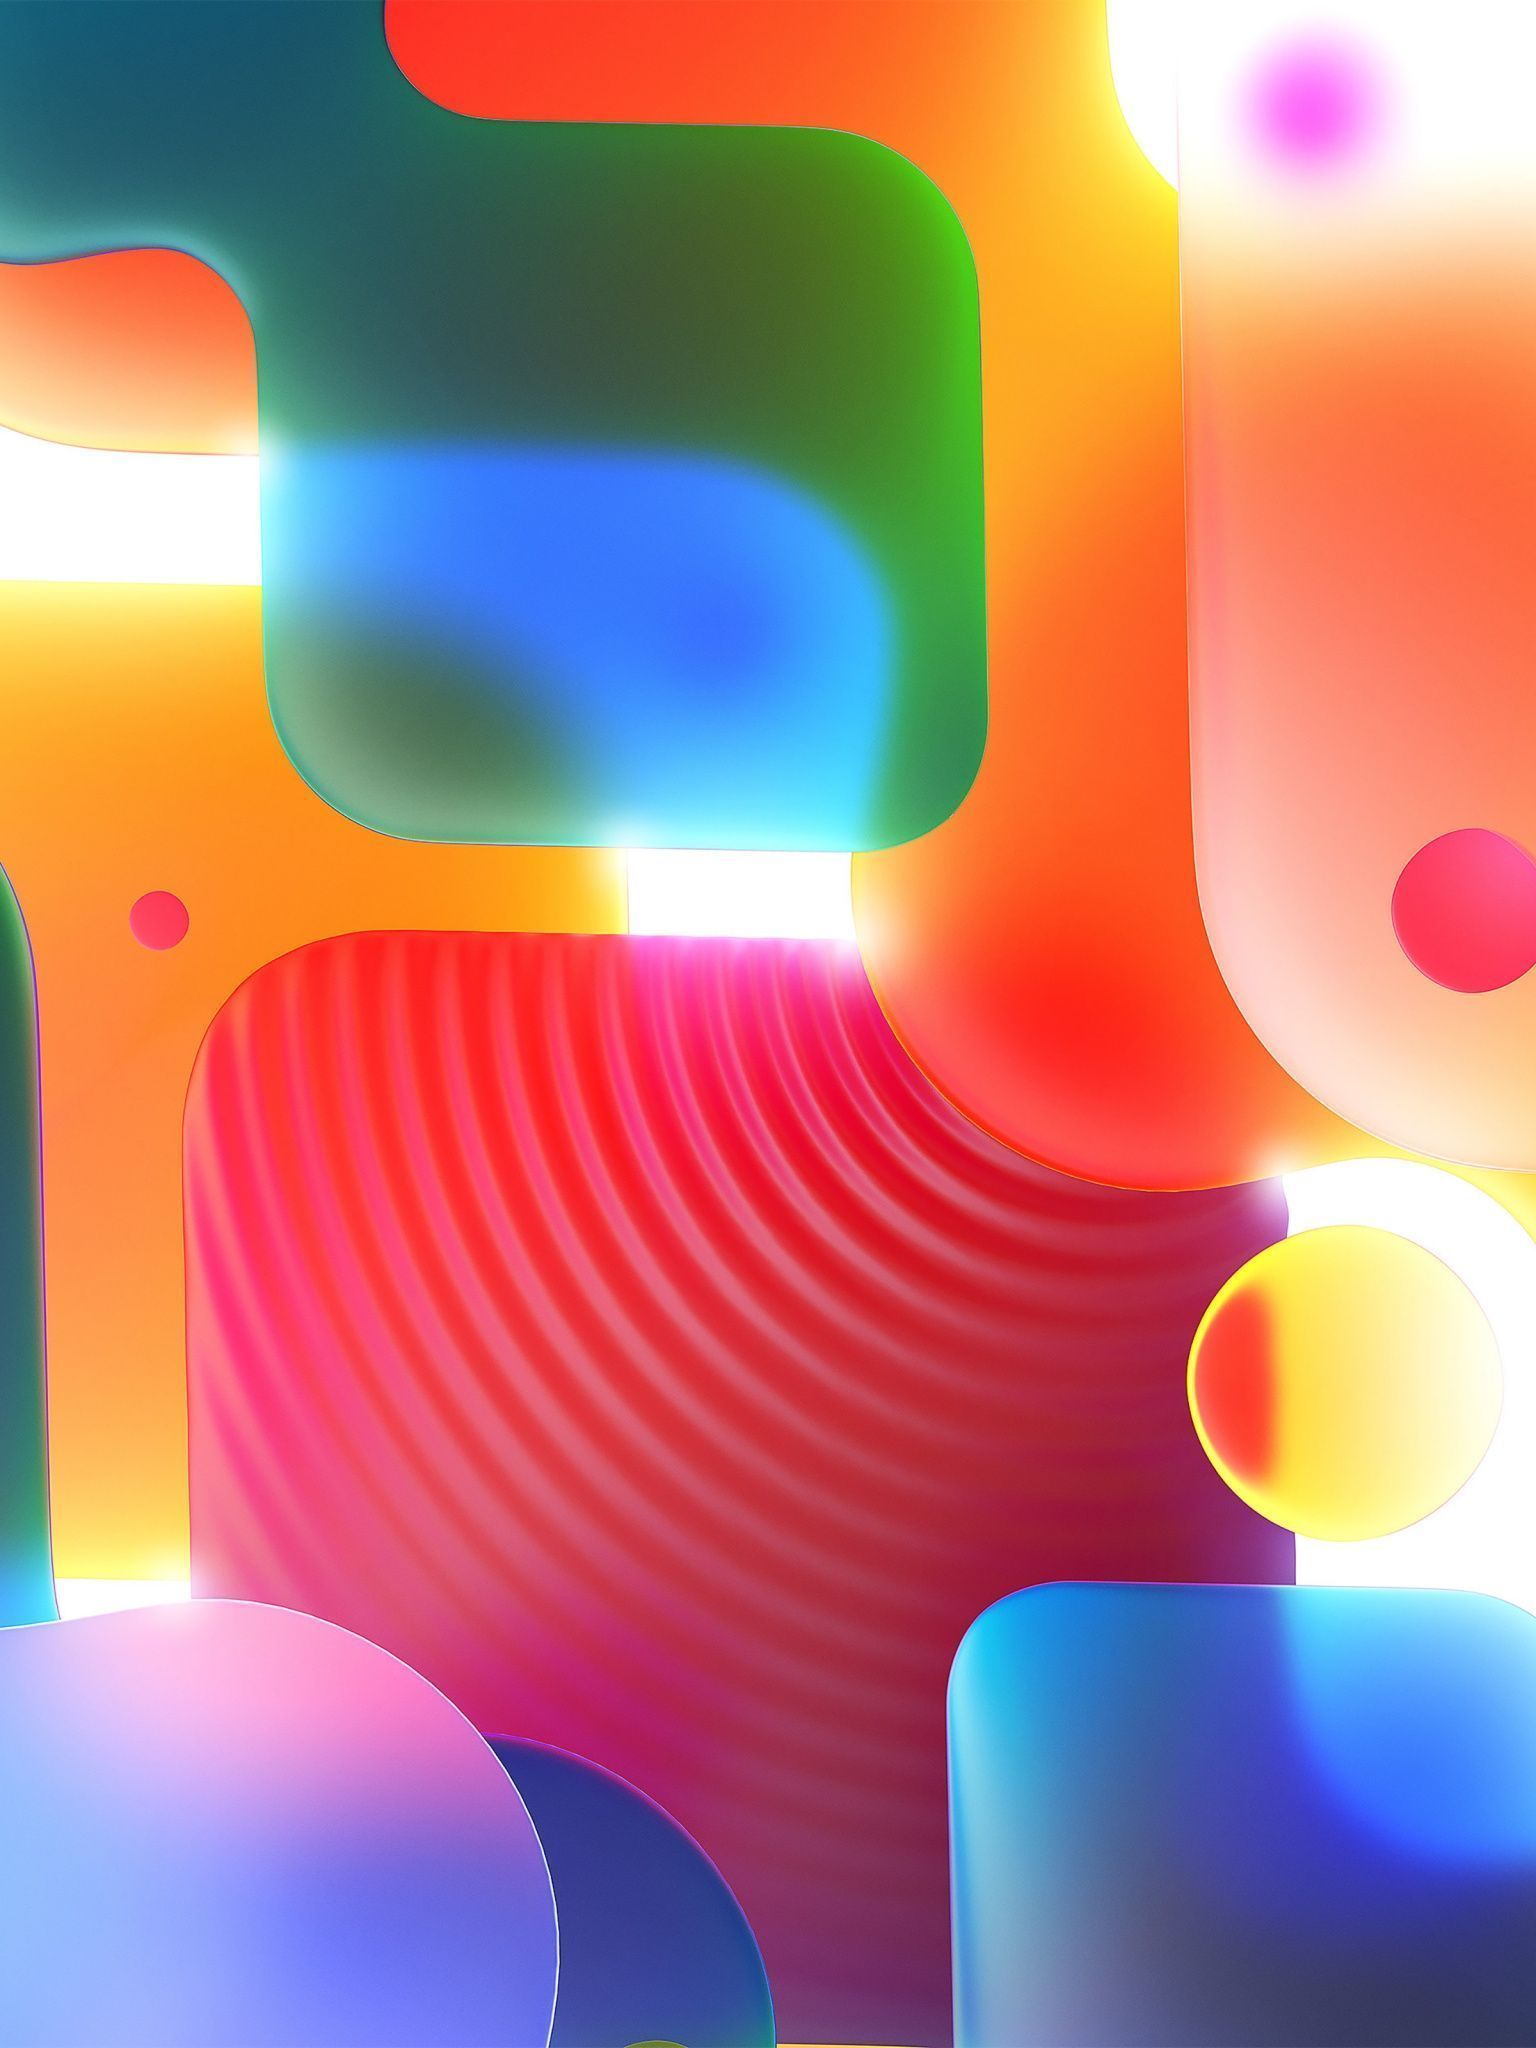 Download the new Xiaomi Mi 11 Ultra wallpaper here - Colorful, 3D